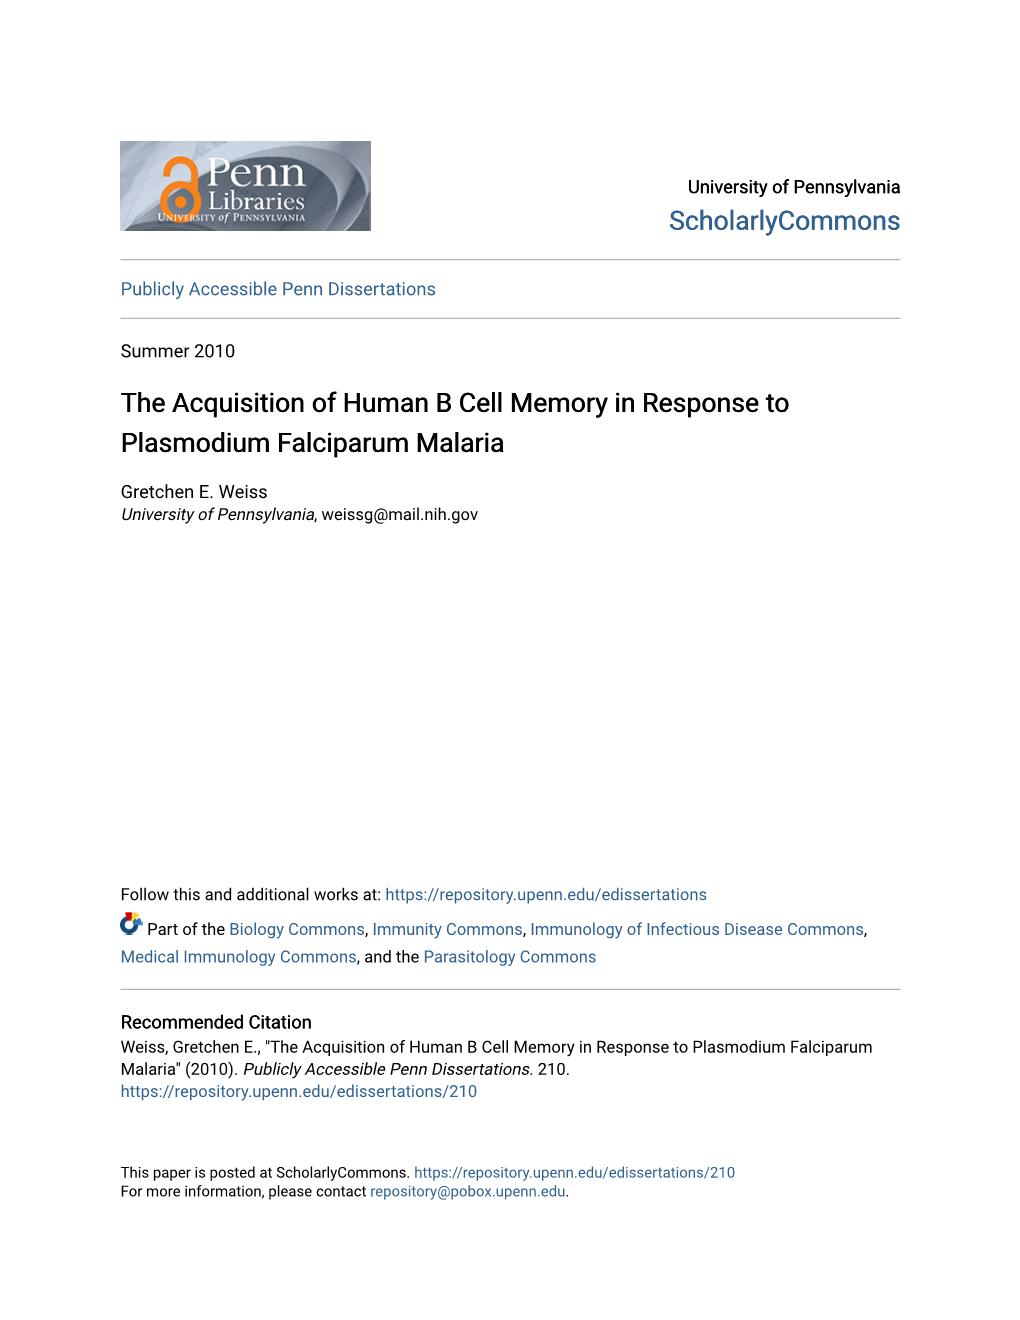 The Acquisition of Human B Cell Memory in Response to Plasmodium Falciparum Malaria